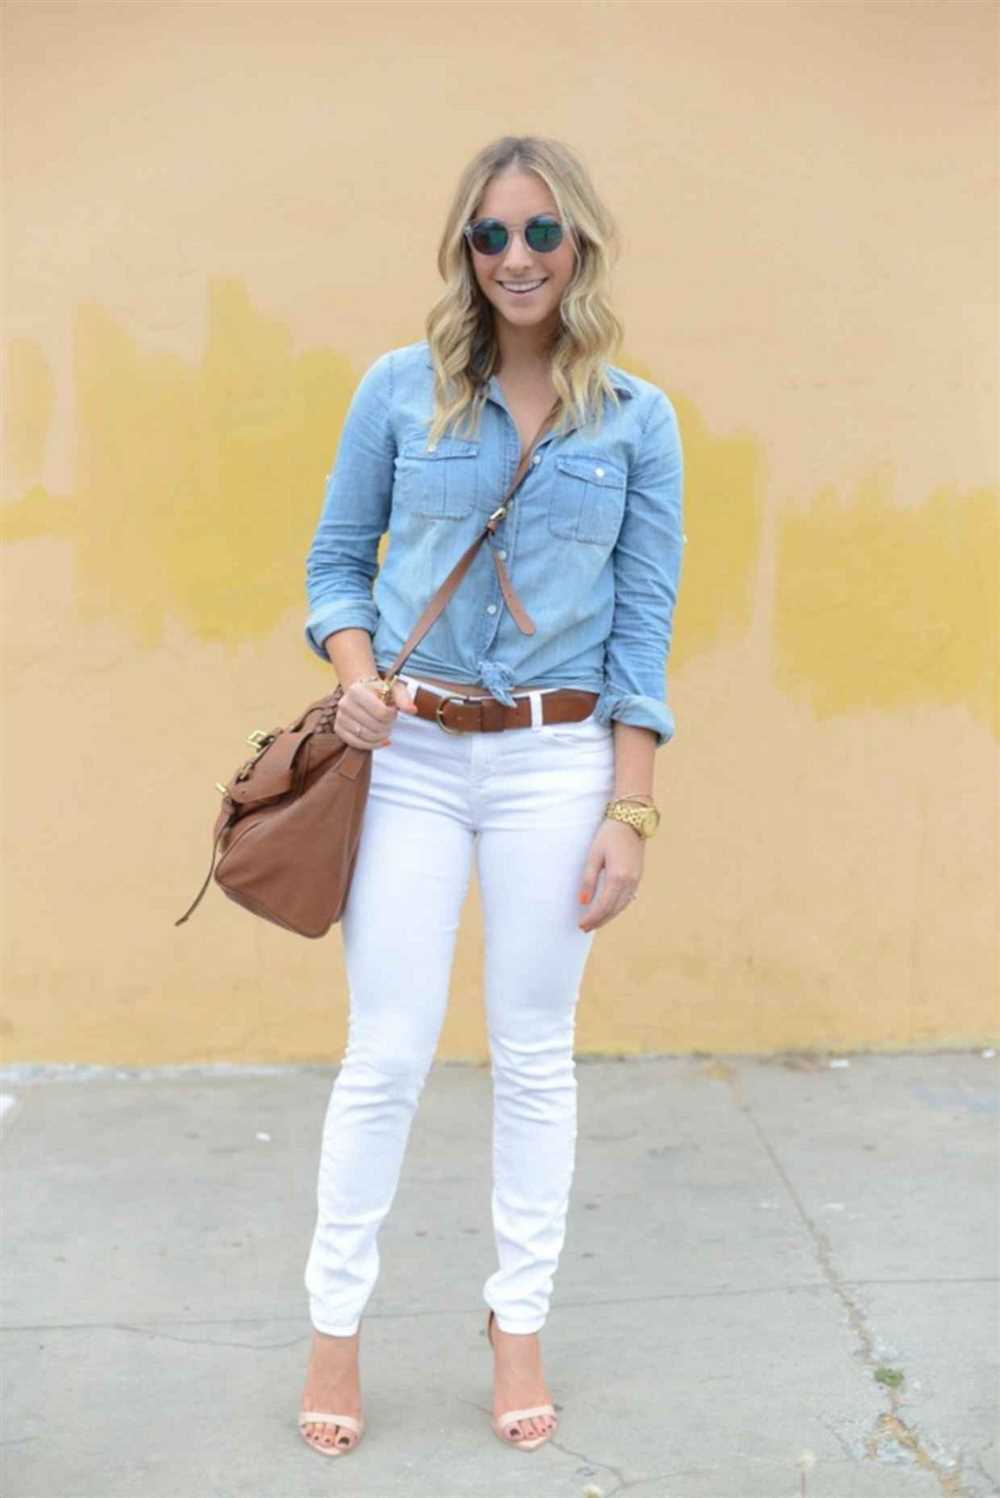 Discover different ways to style your denim shirt with jeans